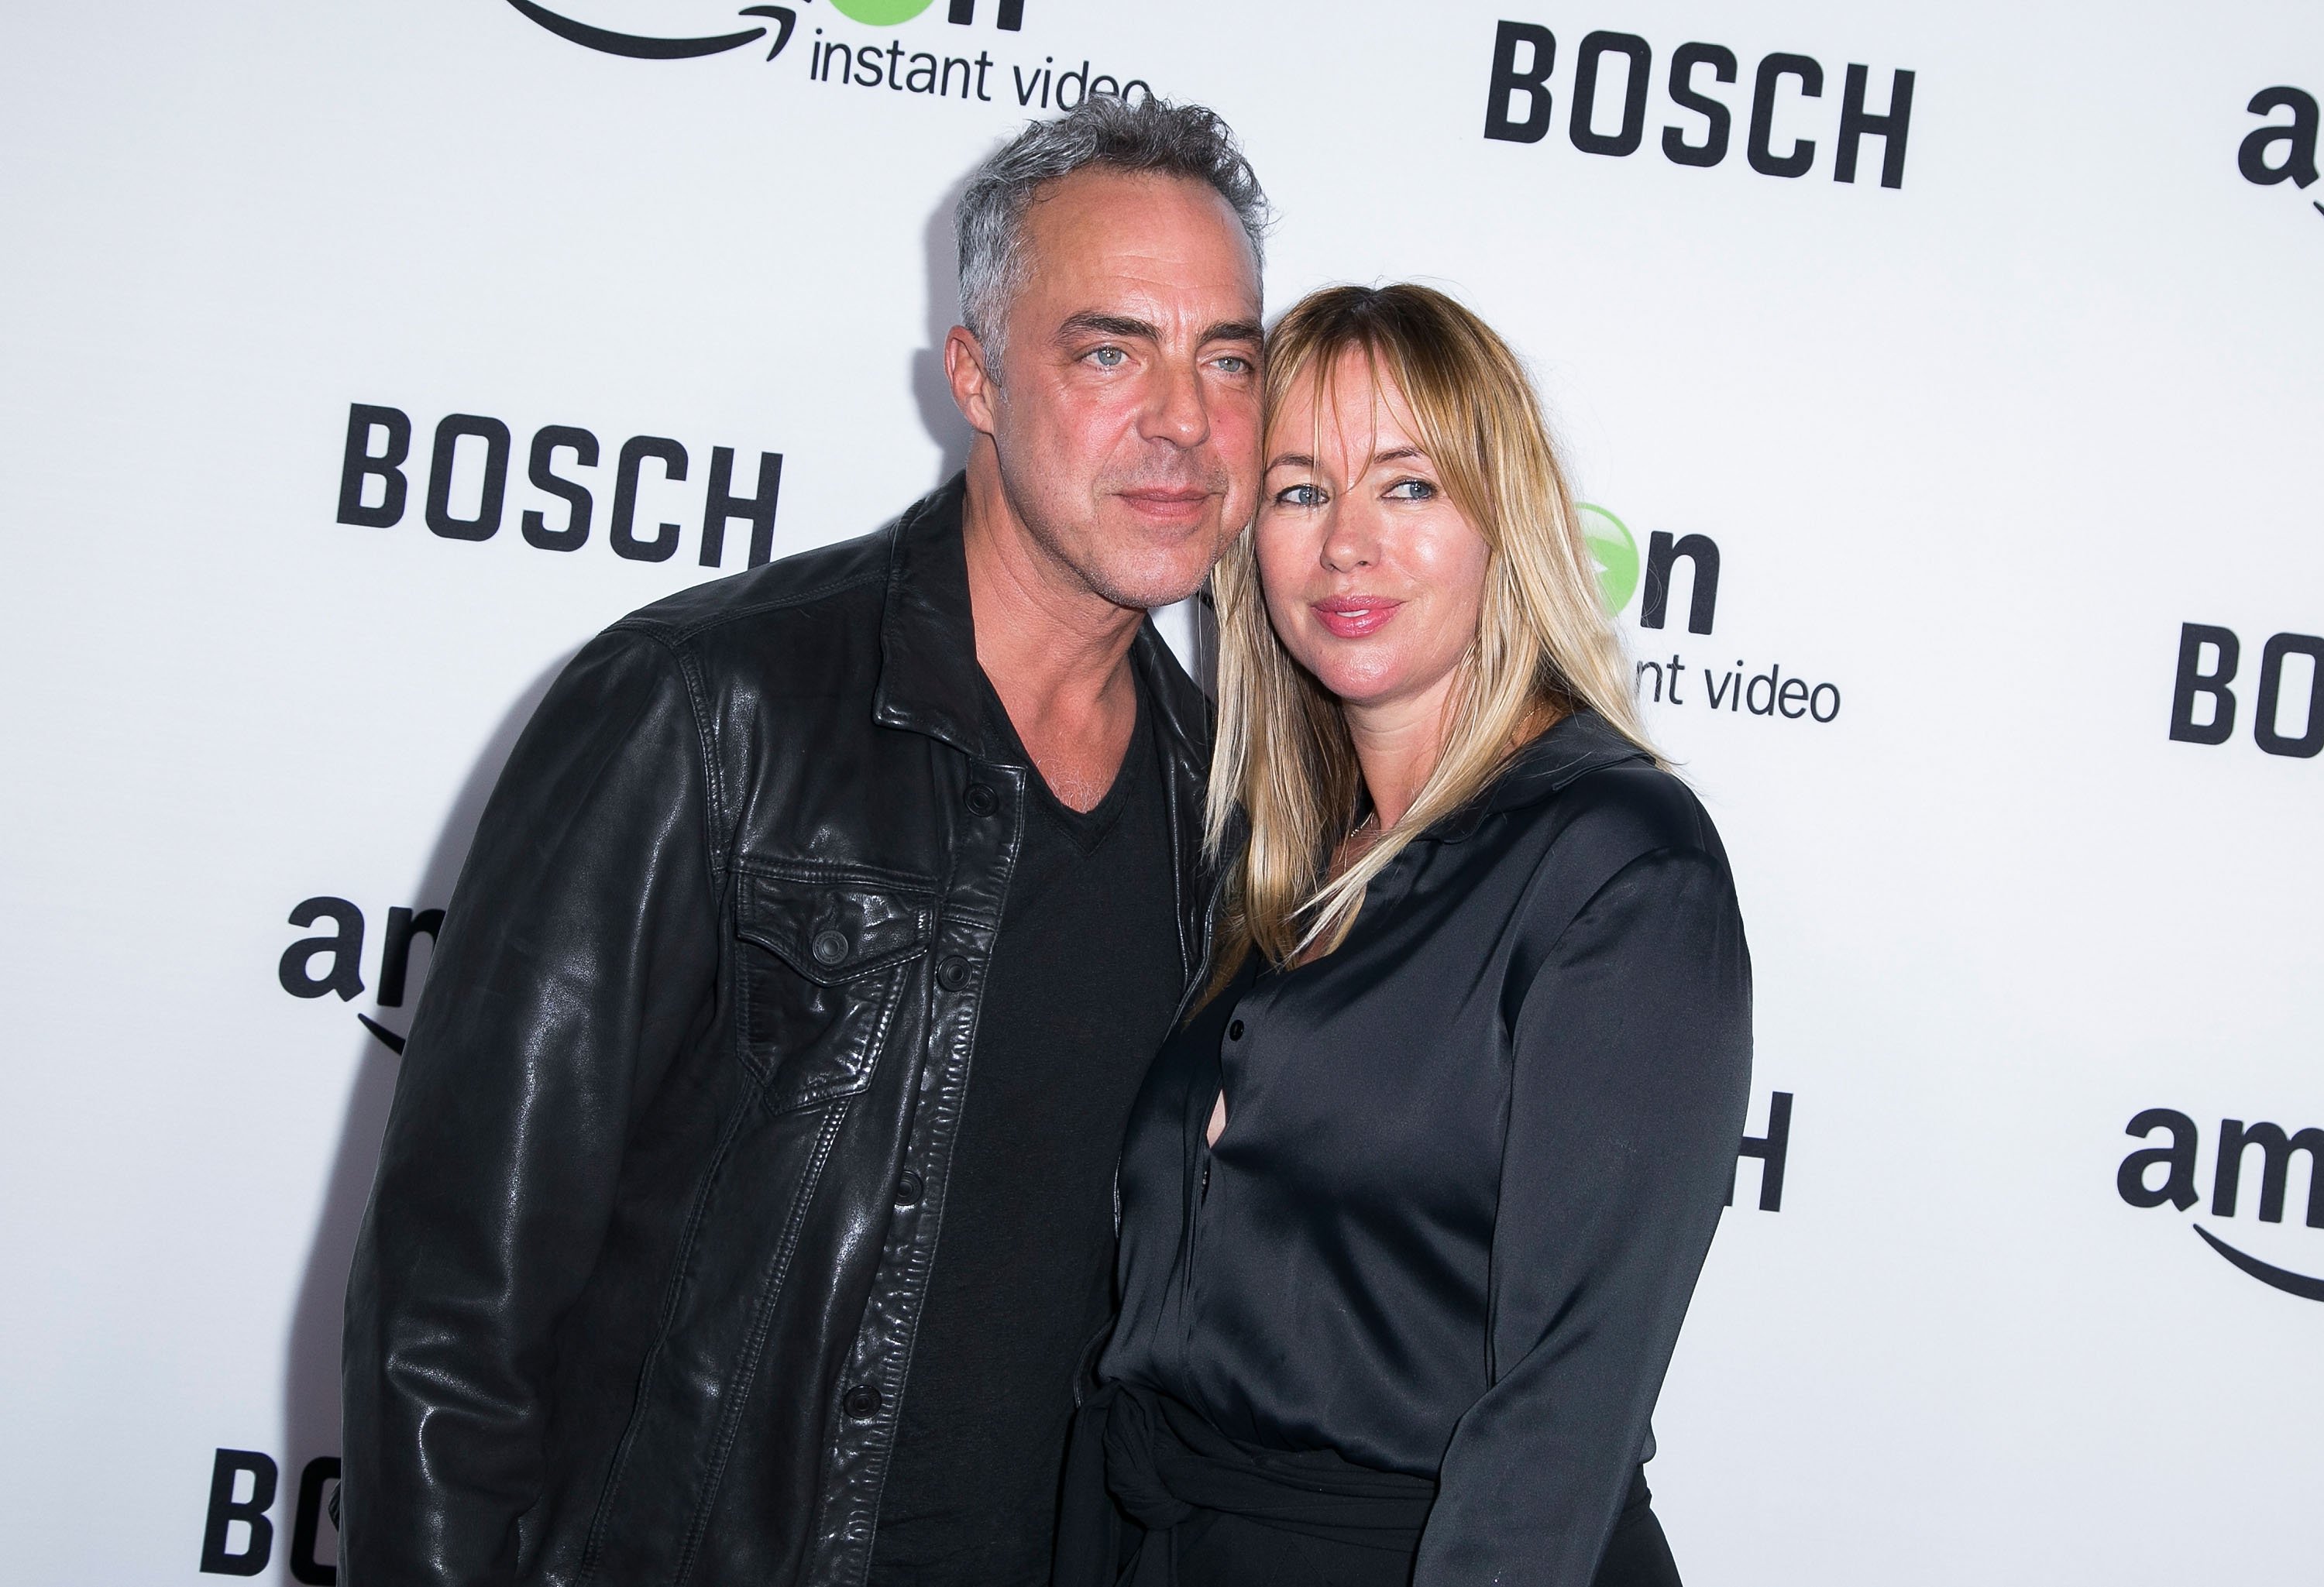 Actor Titus Welliver (L) and wife Jose Welliver attend the "Bosch" premiere screening at The Dome at Arclight Hollywood on February 3, 2015, in Hollywood, California. | Source: Getty Images